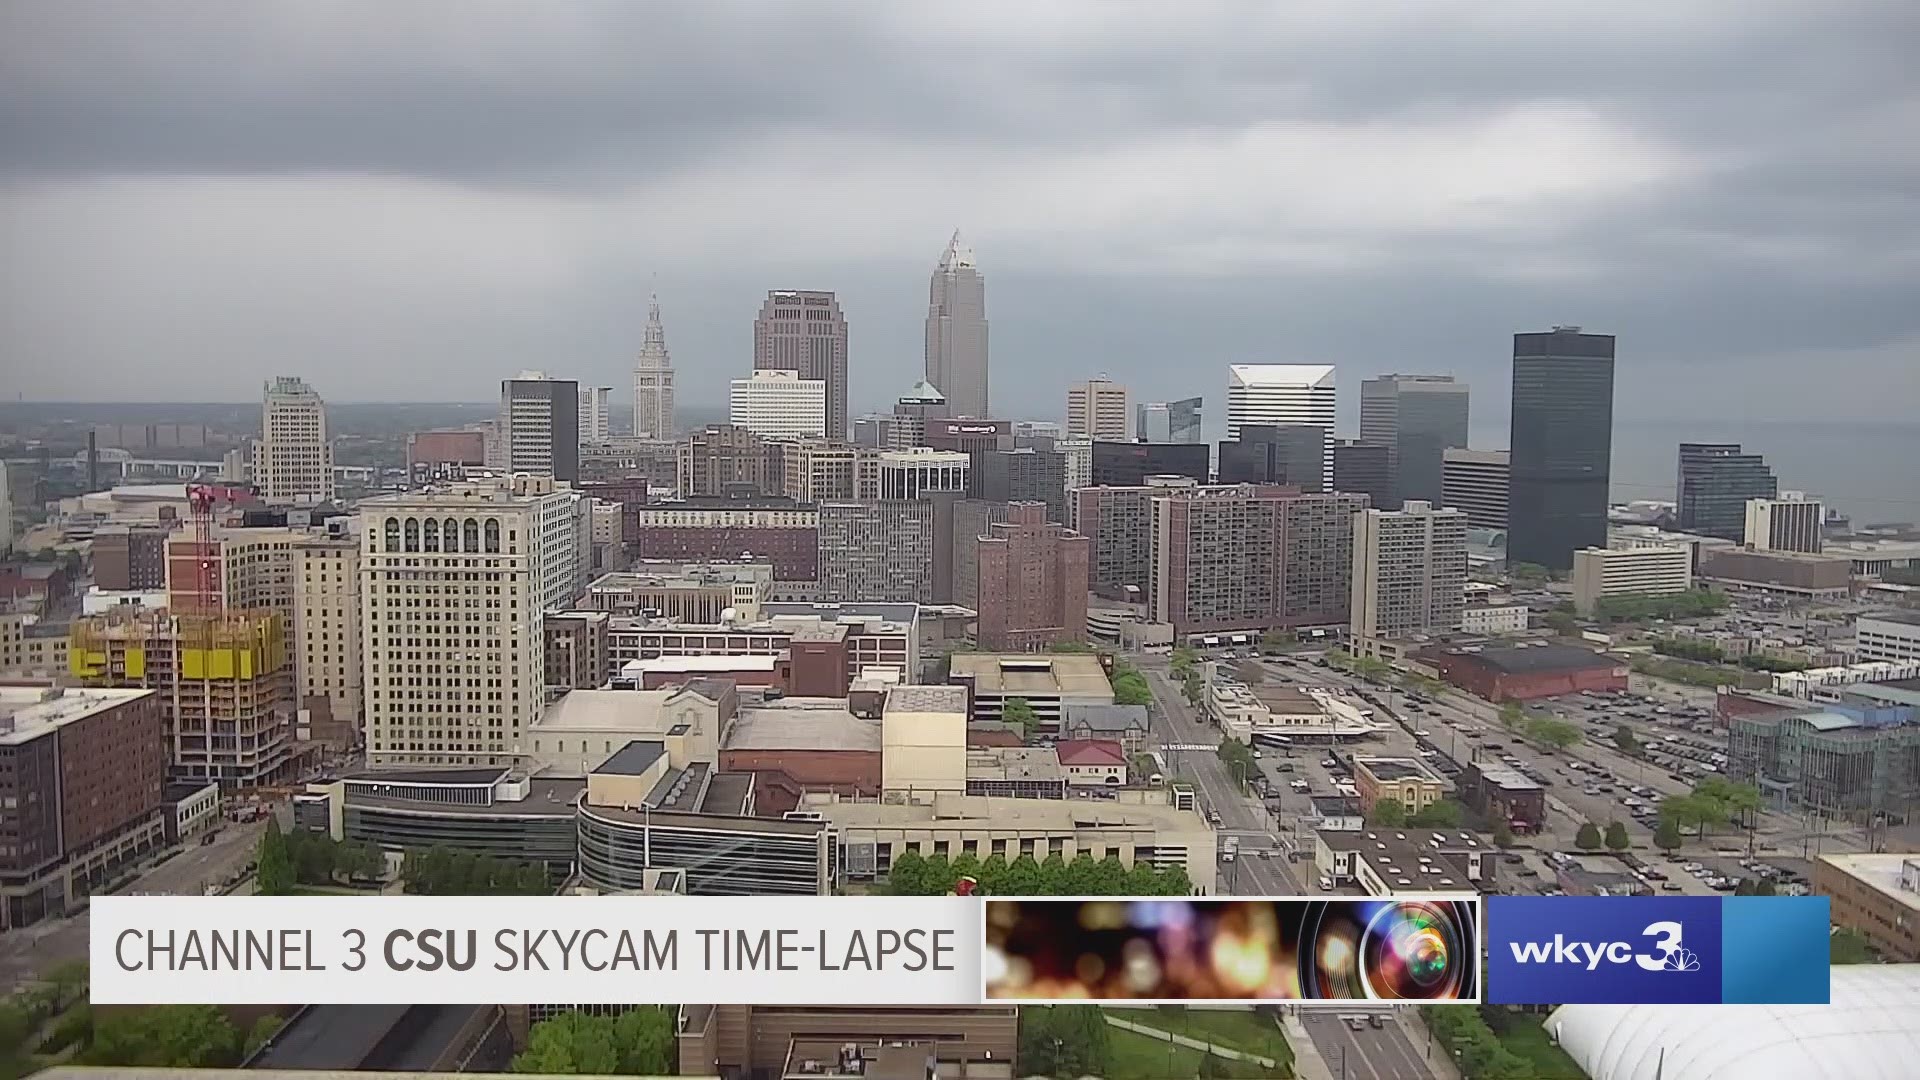 Check out the severe storms rolling through downtown Cleveland this morning from the Channel 3 CSU Skycam weather time-lapse. Then the skies cleared and the sun has been shining ever since! #3weather